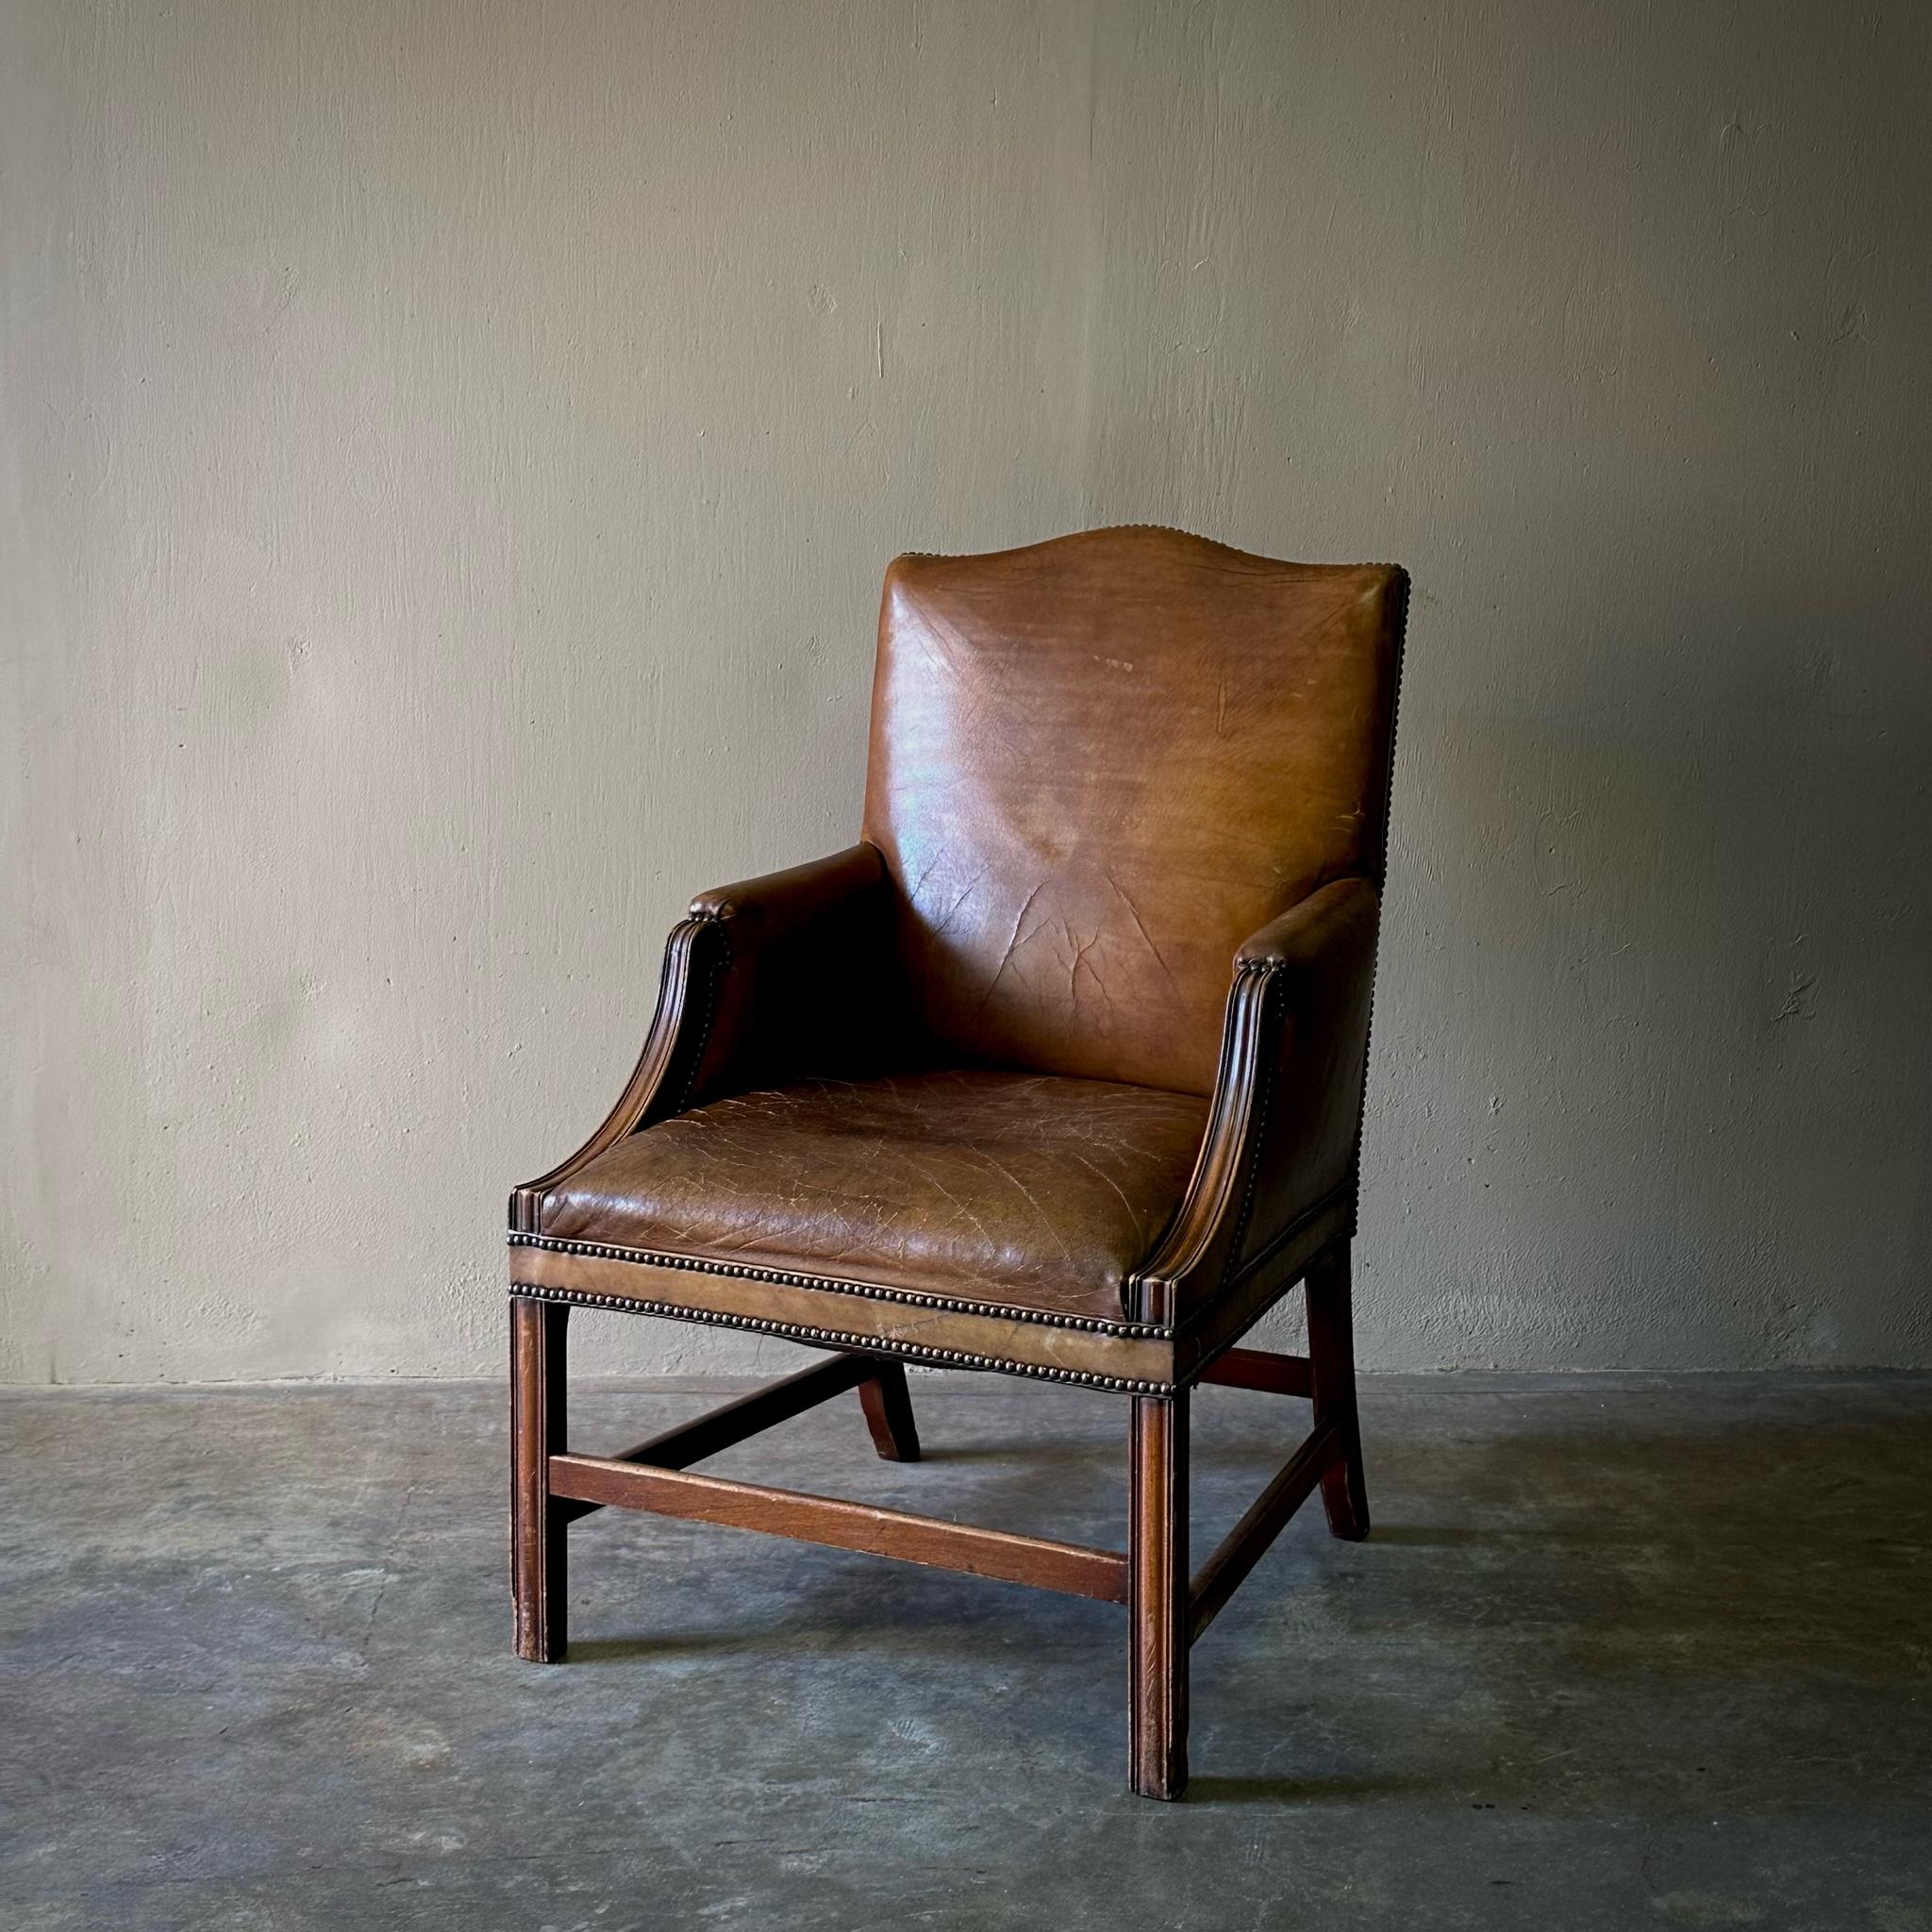 1860s Belgian wingback armchair with buttery chestnut leather upholstery and simple carved mahogany framework. Handsome and understated, this would work especially well as an office or desk chair. 

Belgium, circa 1860

Dimensions: 23.6 W x 25.6